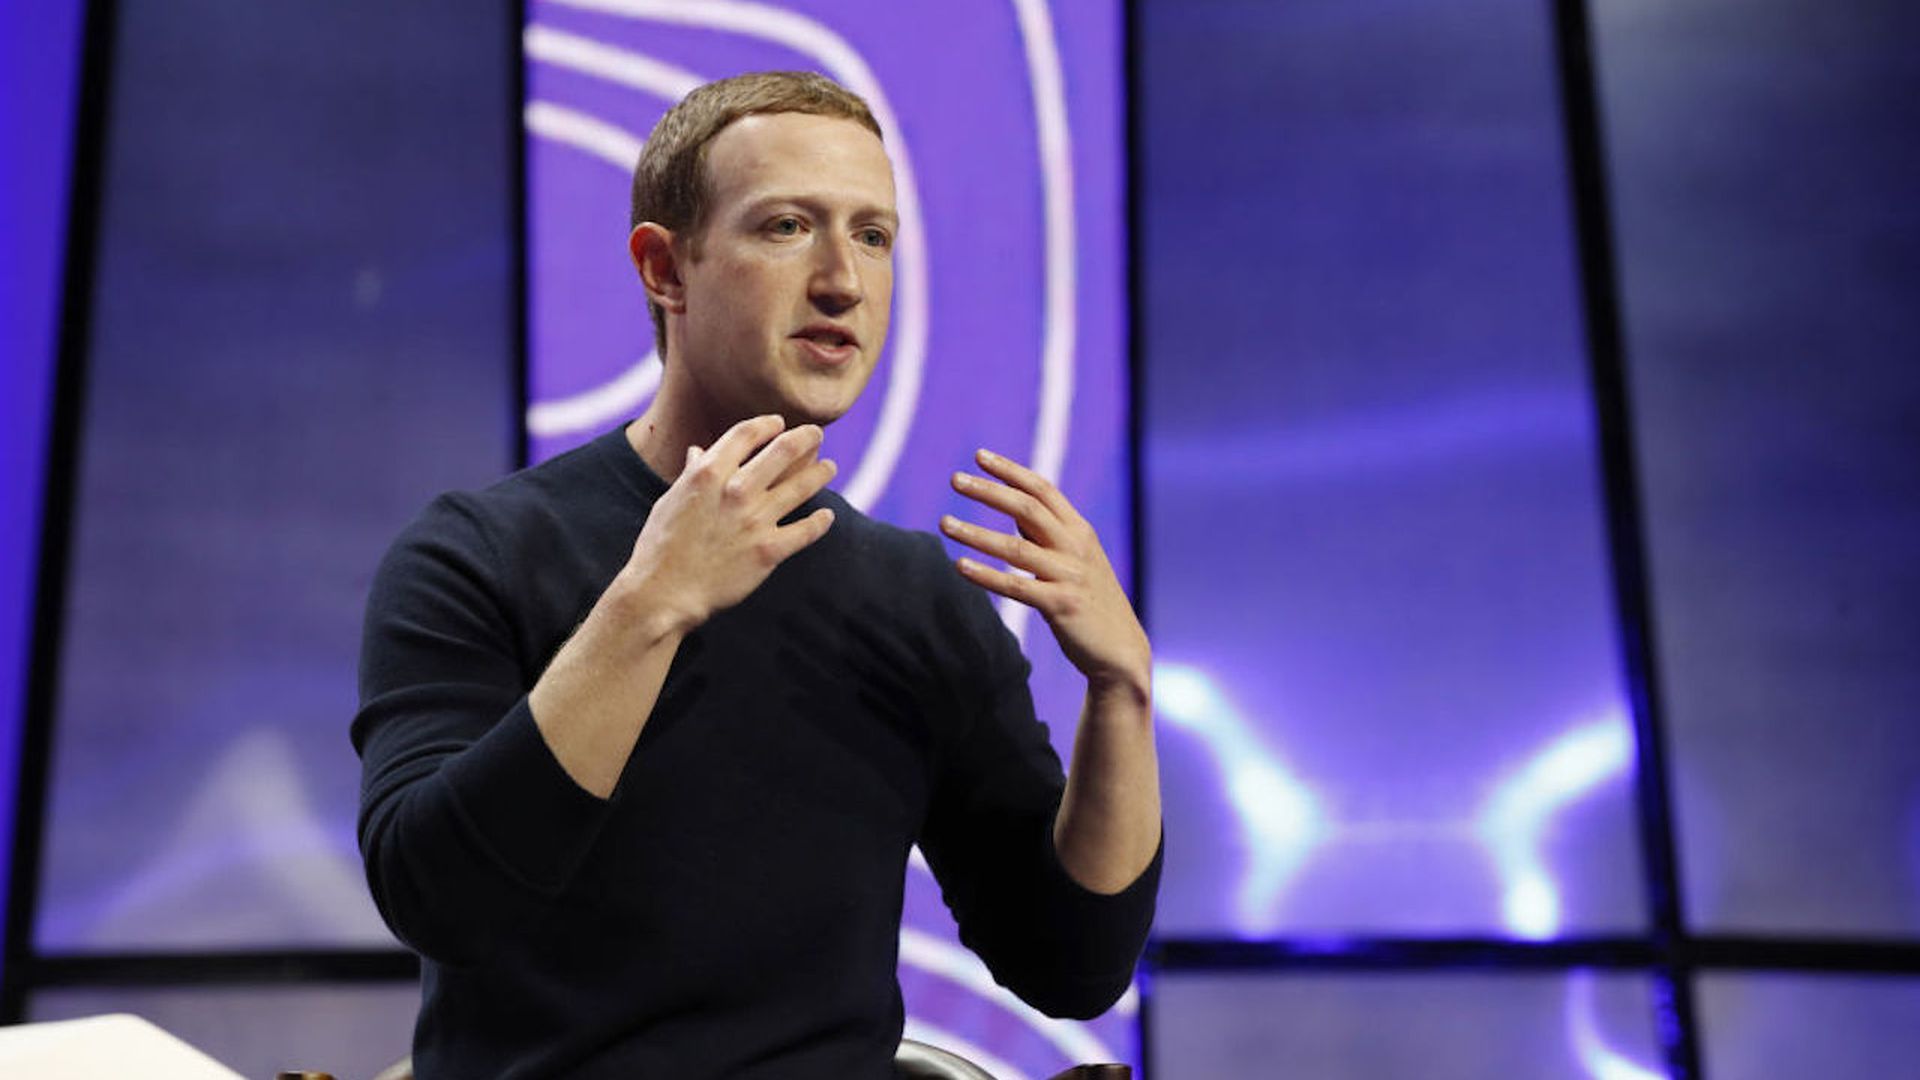 A photo of Meta CEO Mark Zuckerberg speaking on a stage in front of a purple background